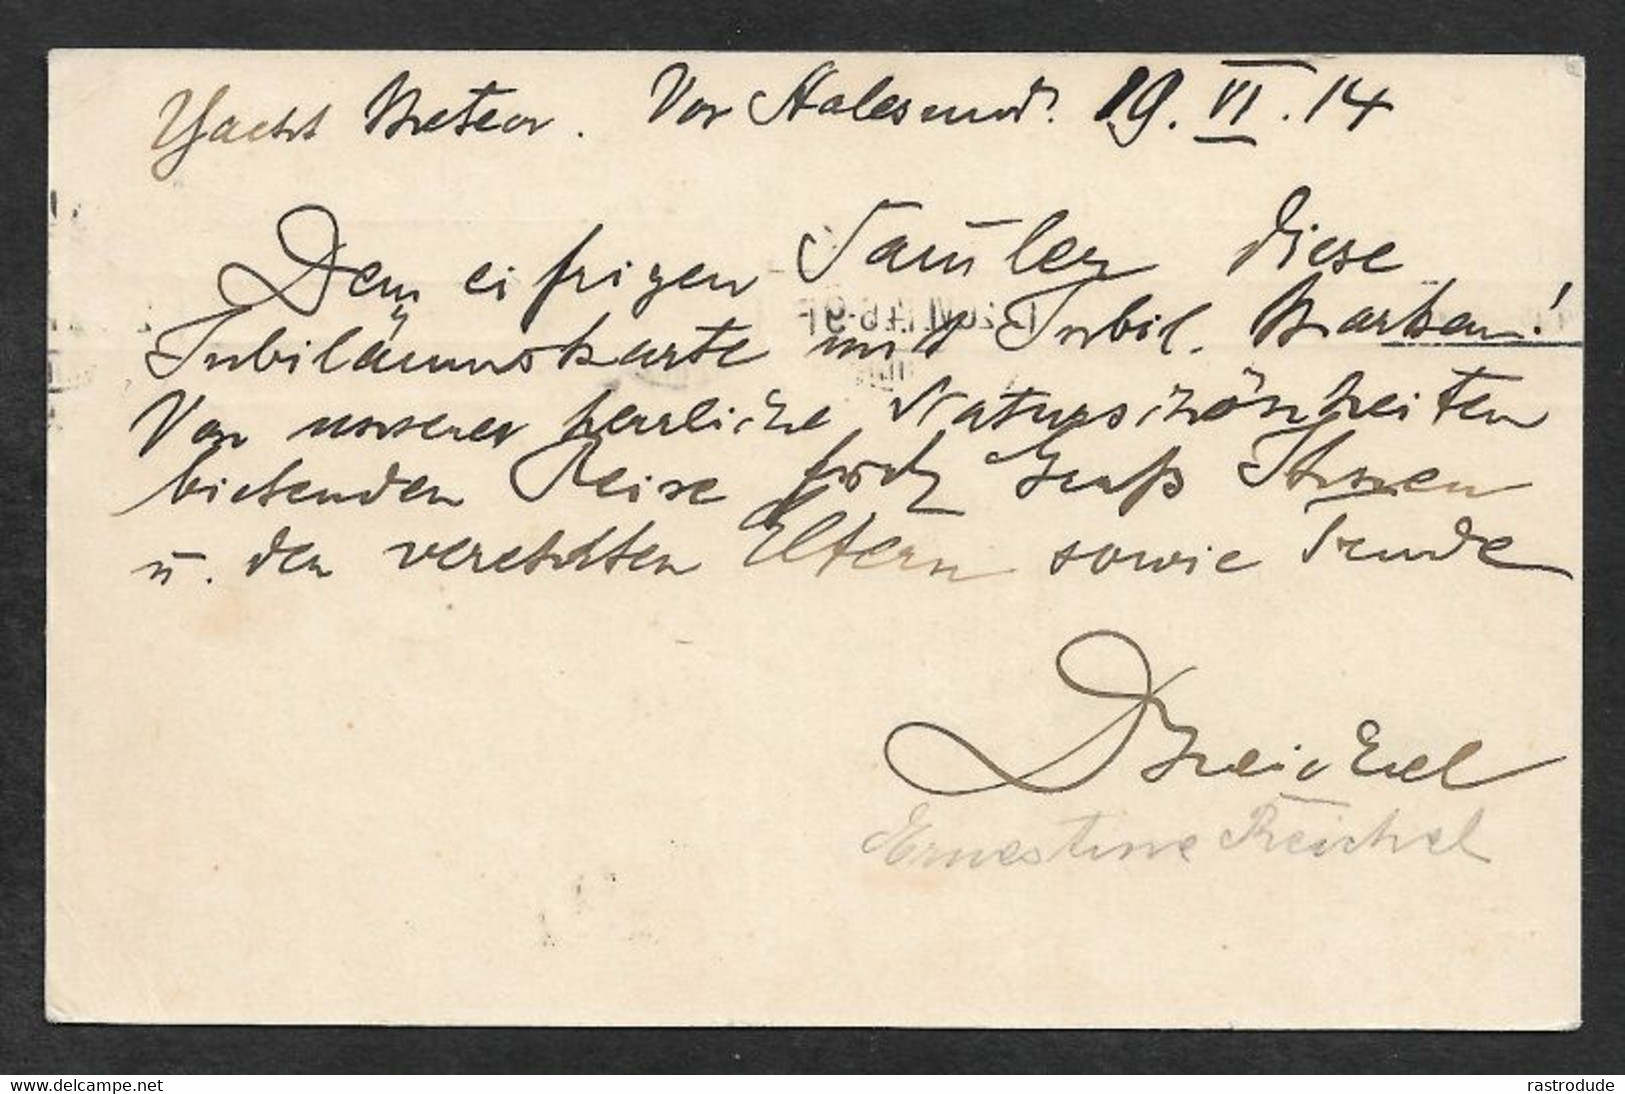 1914. NORWAY NORWEGEN 1814 - 1914 JEG VIL VÆRGE MIT LAND.to GERMANY - WRITTEN UPON WILH. II ROYAL YACHT METEOR - Lettres & Documents